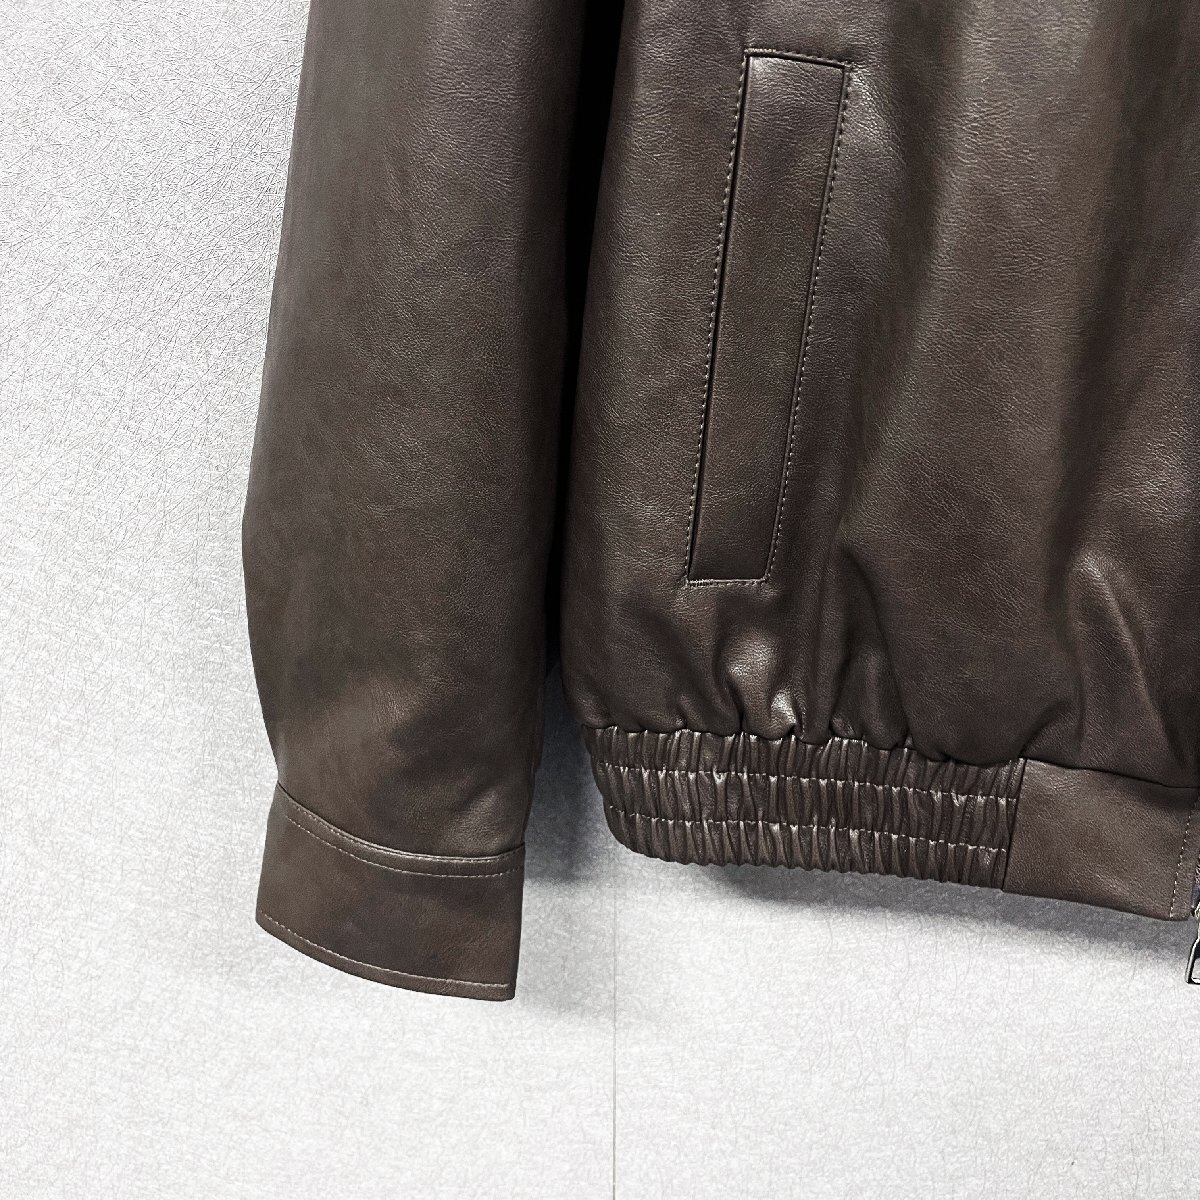  high class * leather jacket regular price 15 ten thousand *Emmauela* Italy * milano departure * high quality cow leather piece . leather jacket motorcycle Rider's dressing up piece .L/48